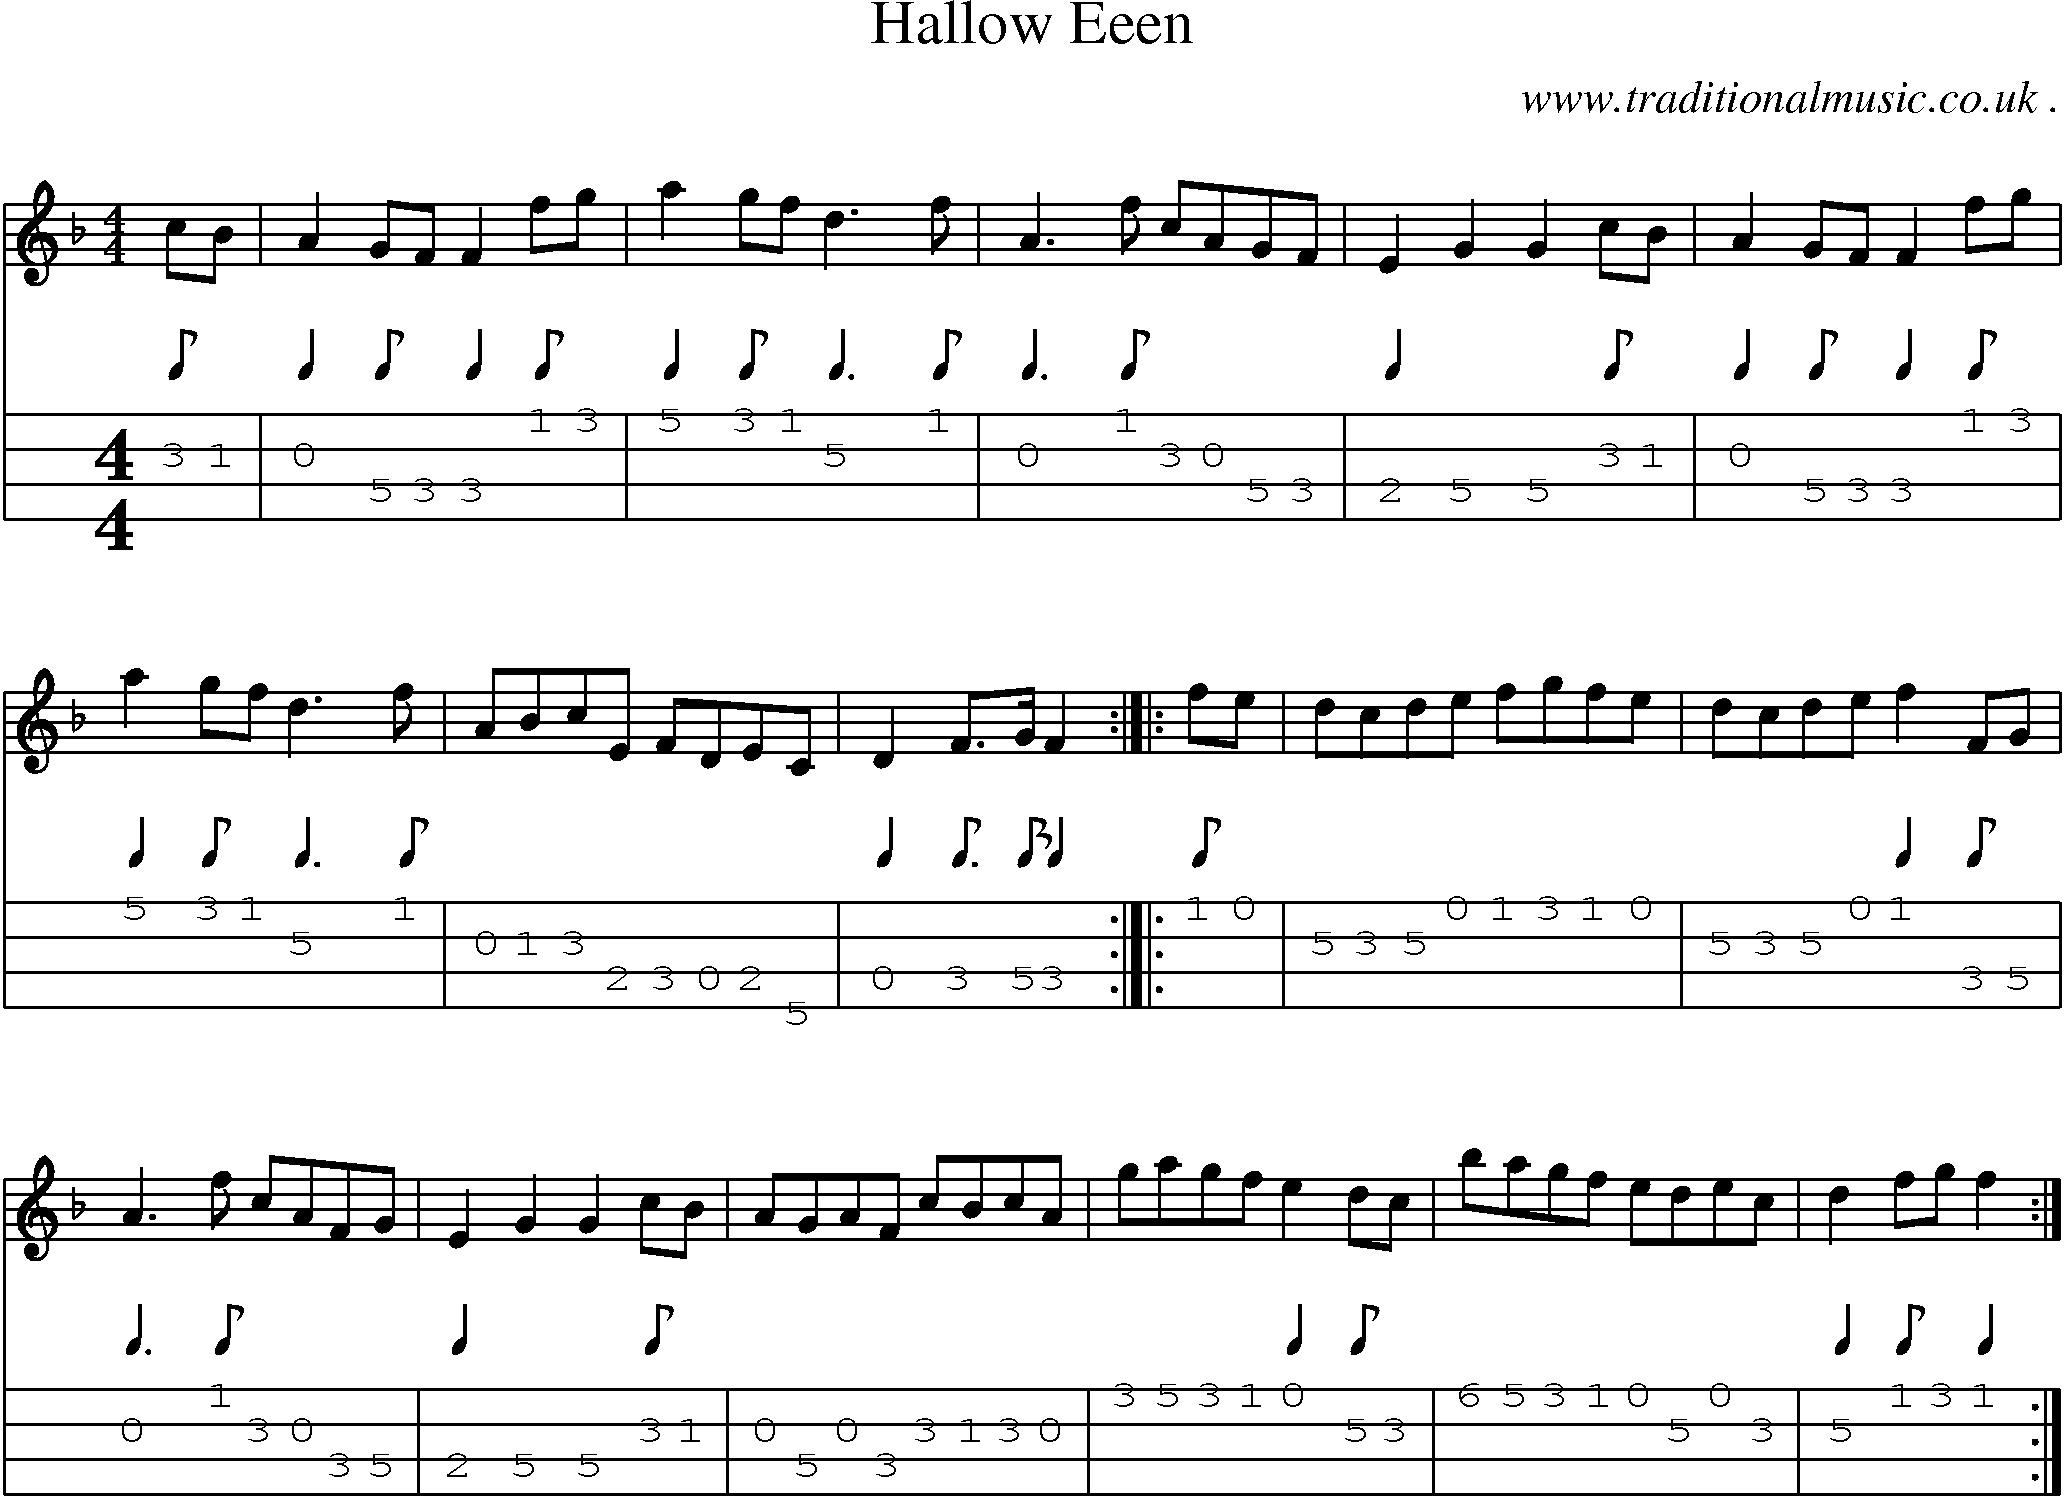 Sheet-music  score, Chords and Mandolin Tabs for Hallow Eeen 